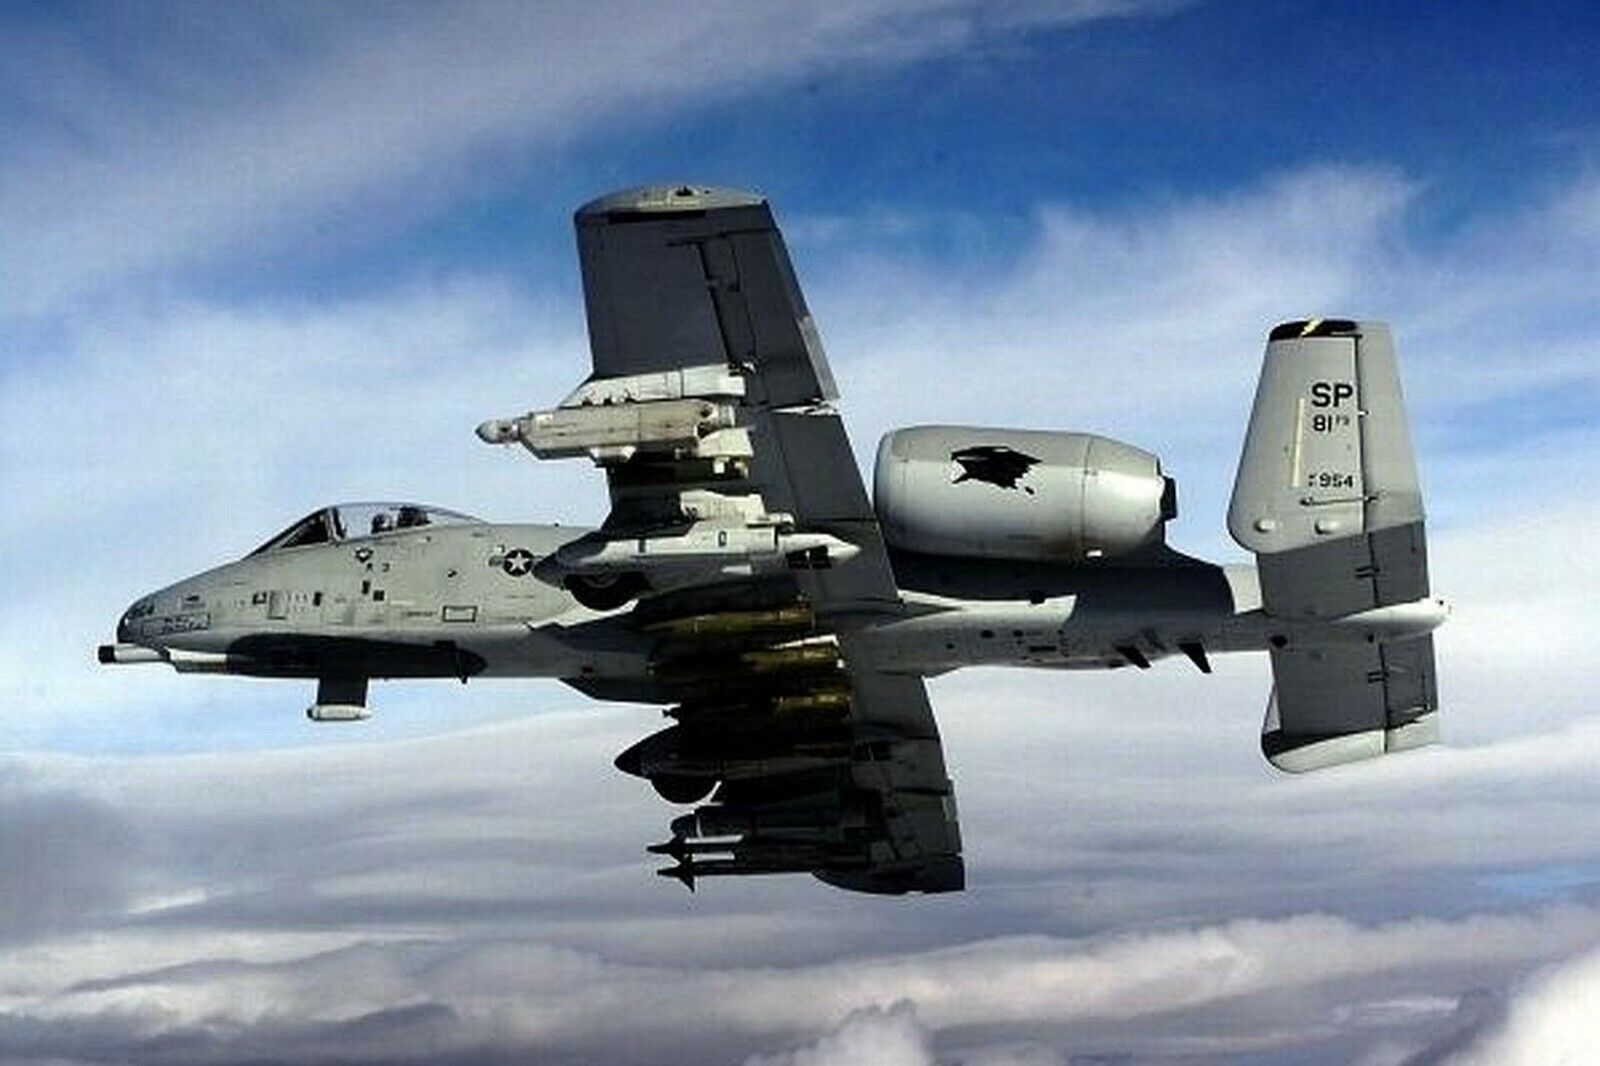 A-10 Thunderbolt II PHOTO Warthog United States Air Force Ground Attack Jet